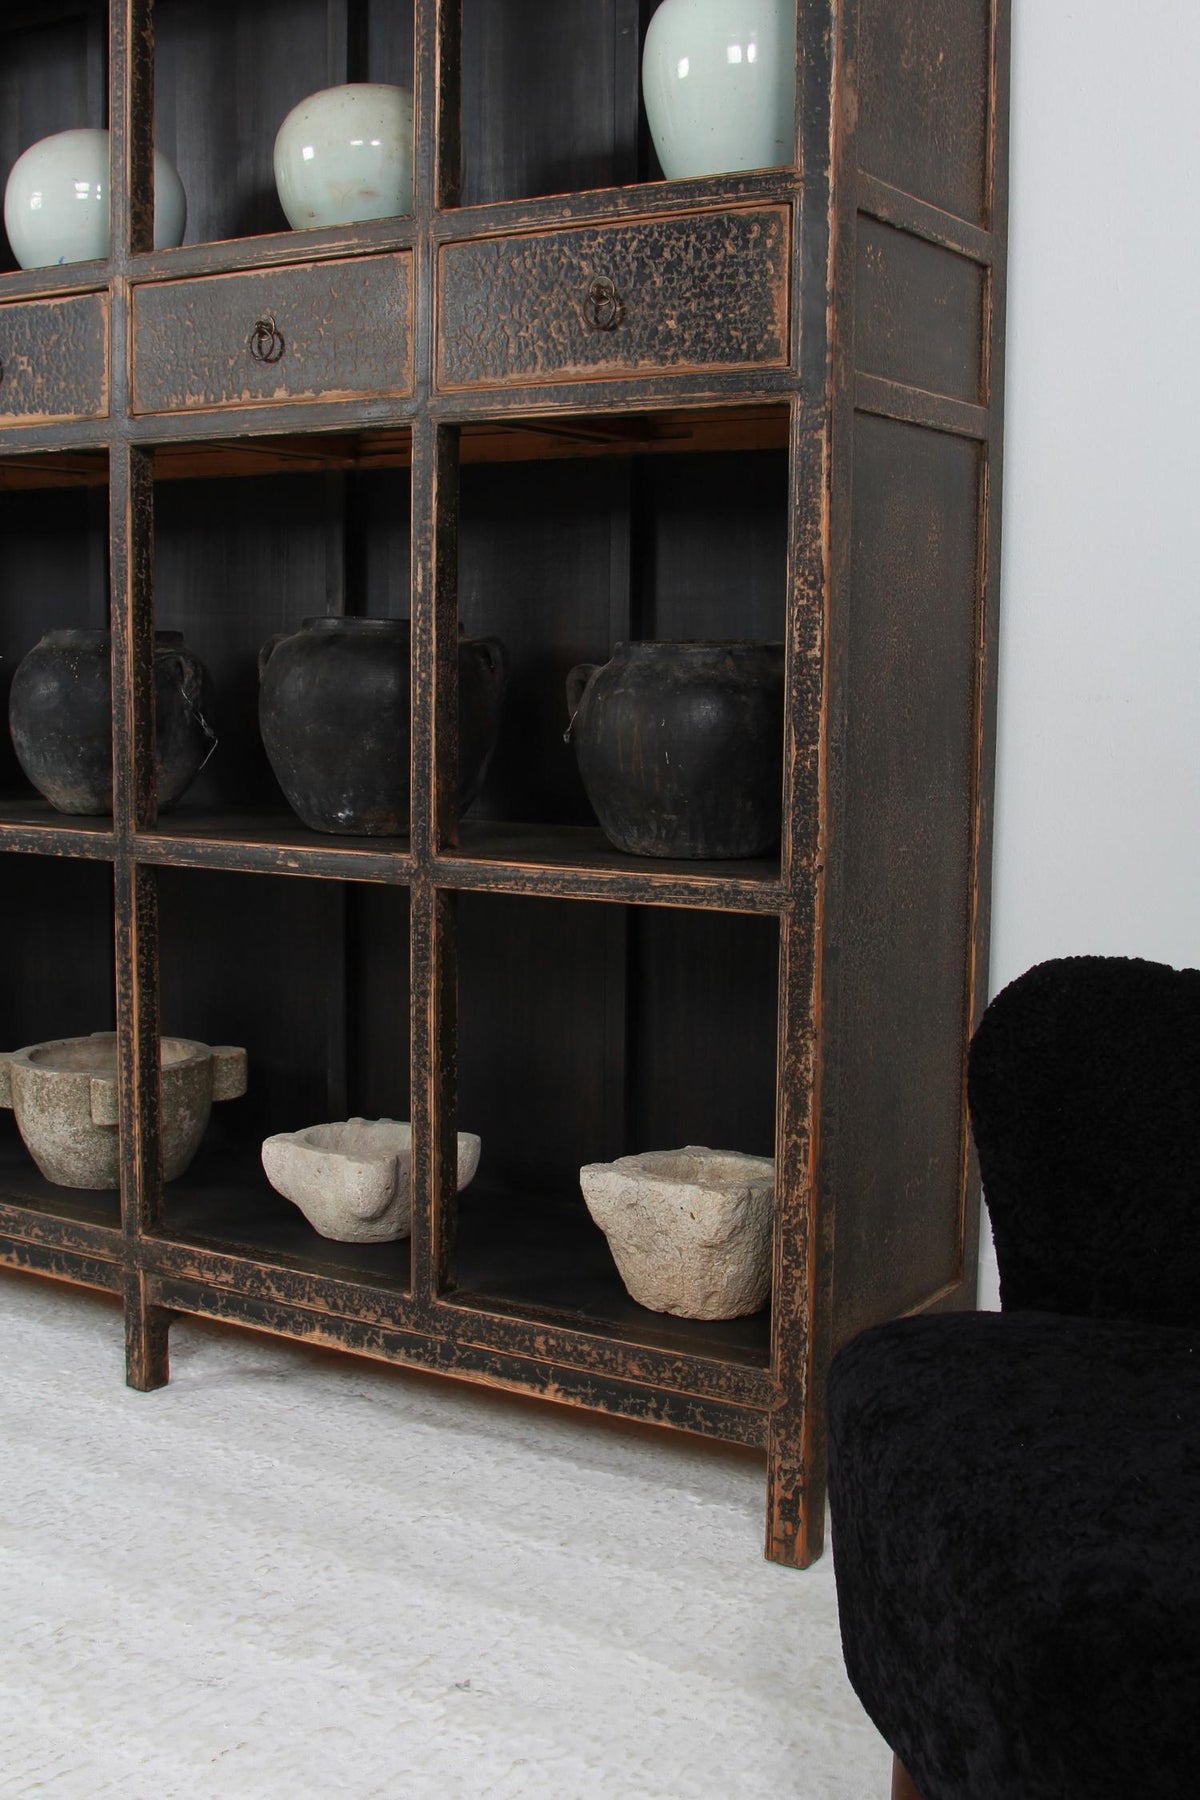 GRAND SCALE ANTIQUE BLACK PAINTED OPEN DISPLAY CABINET